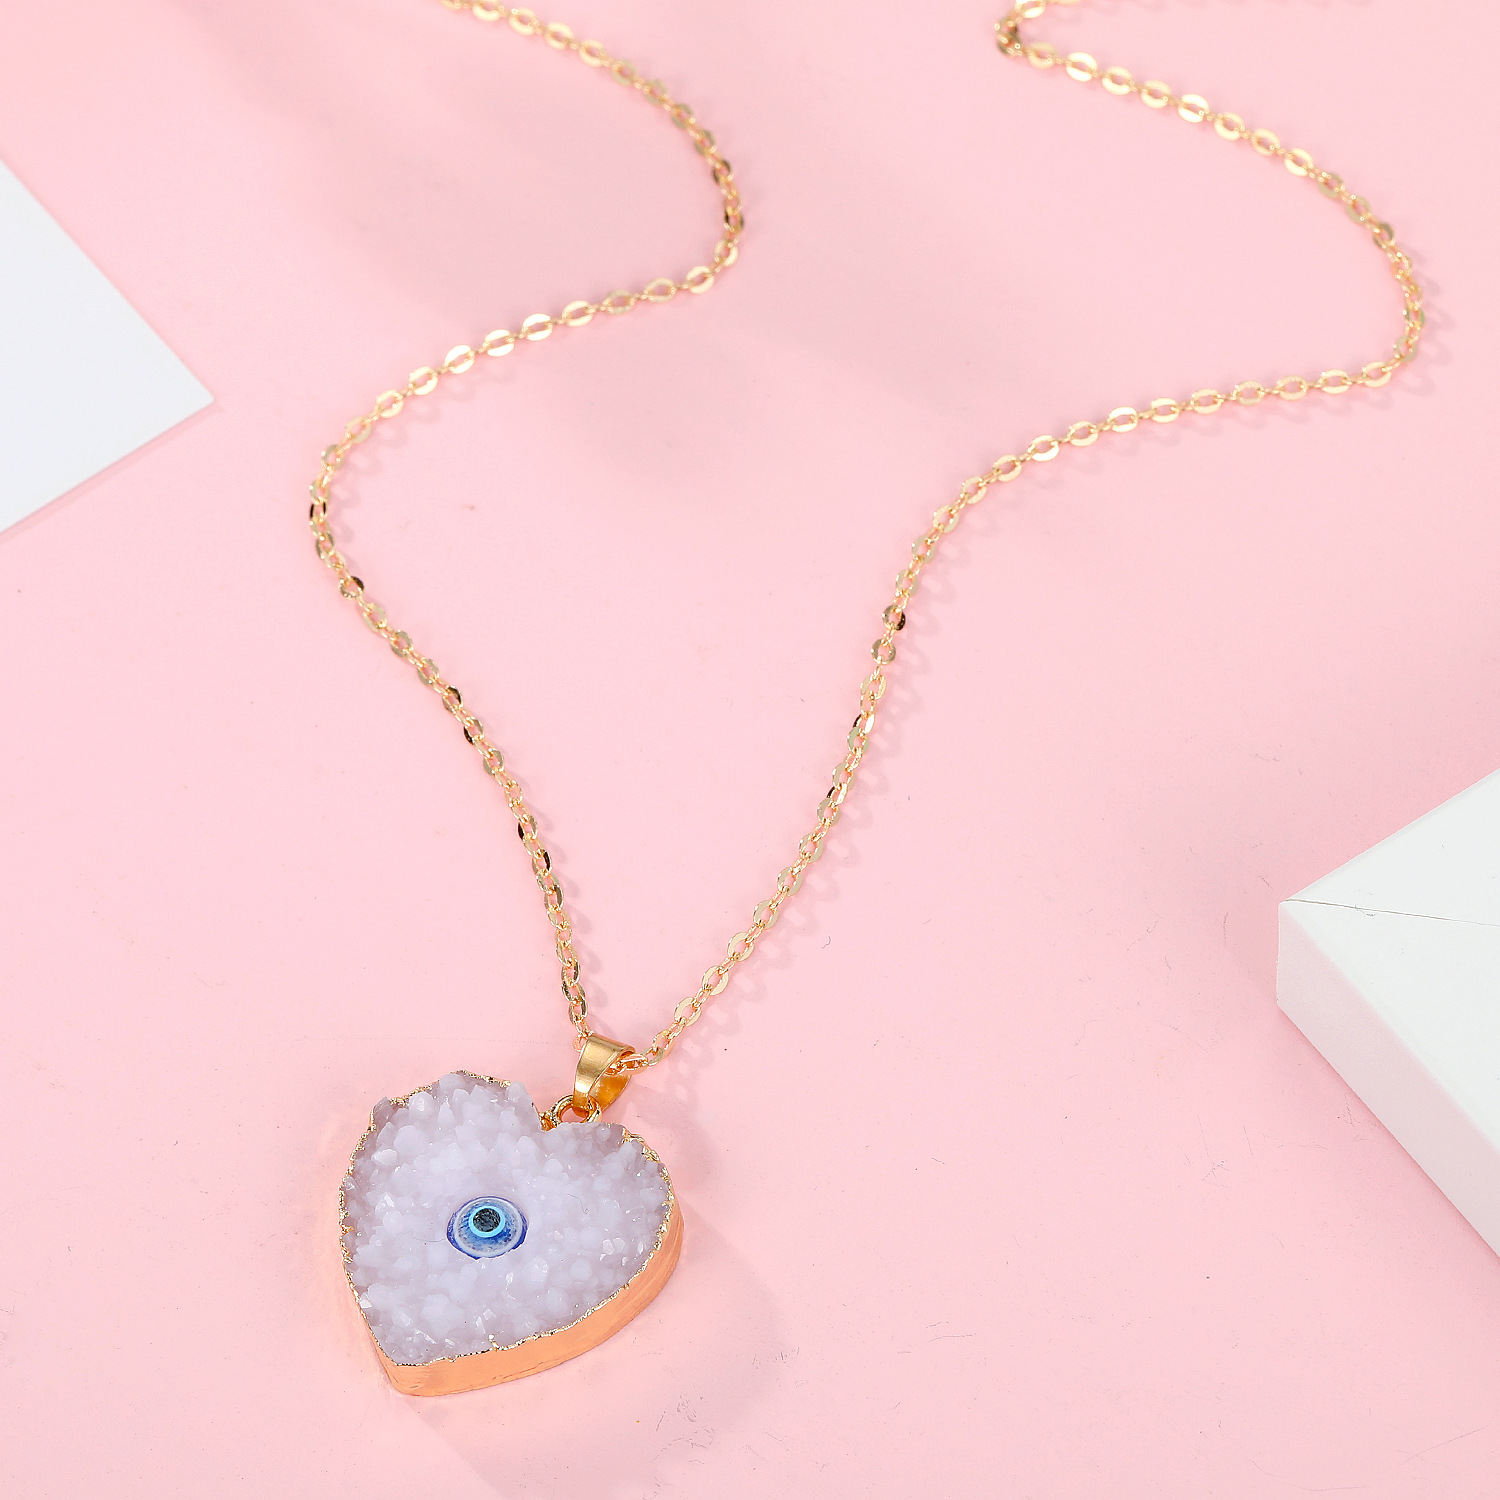 New style eye pendant necklace imitation natural stone love resin necklace wholesalepicture8